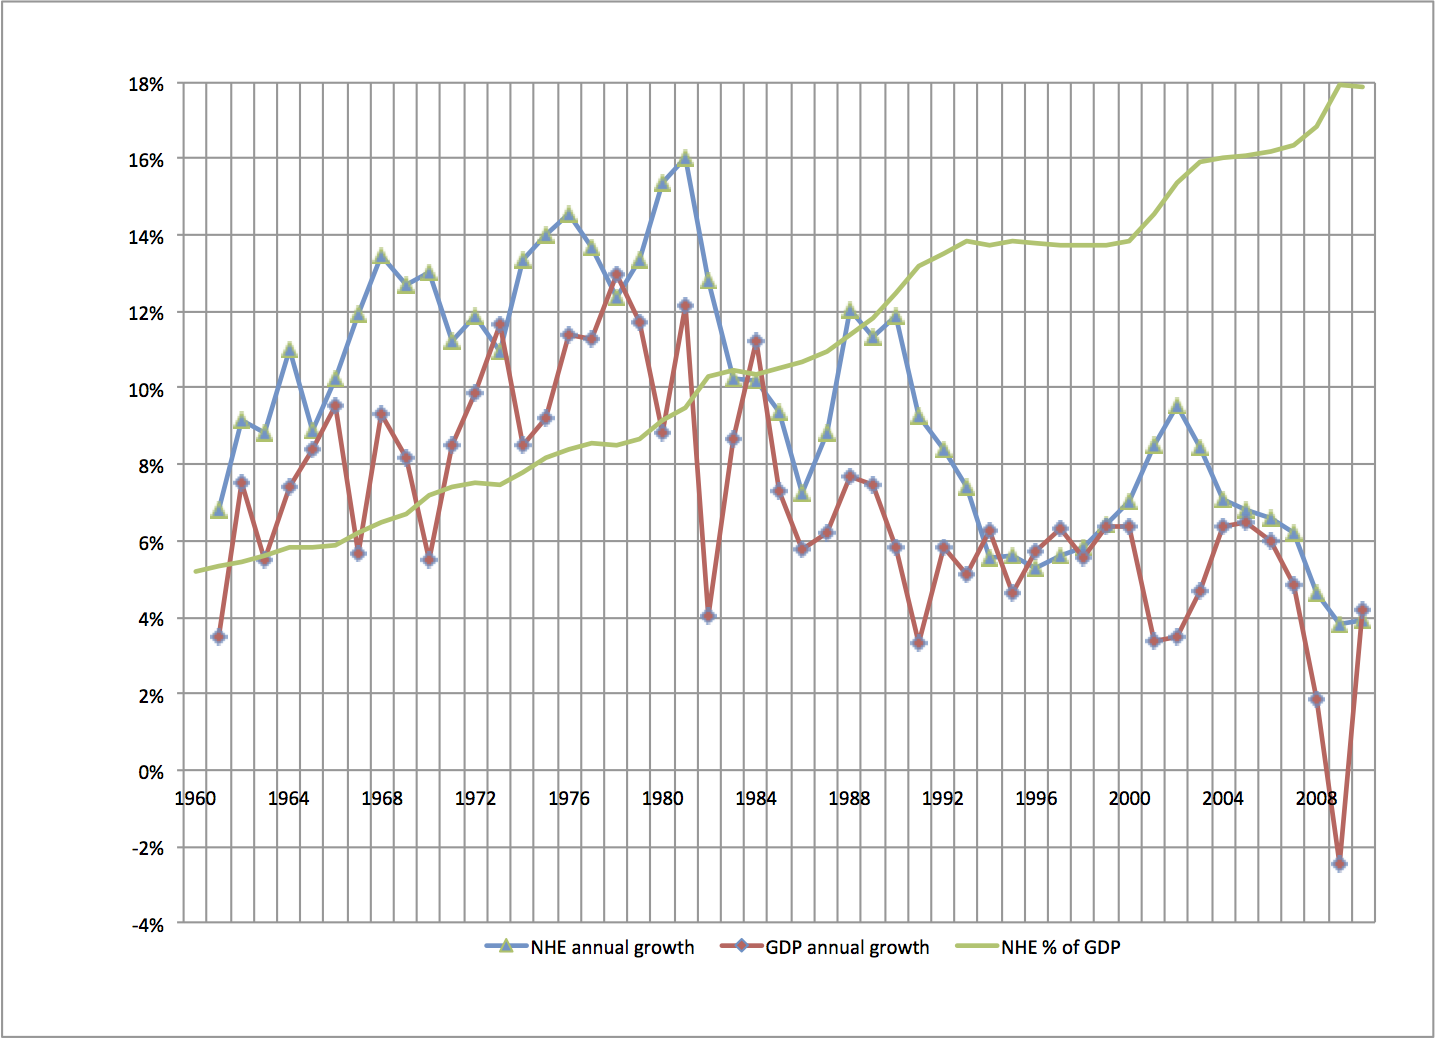 annual growth, nhe and gdp